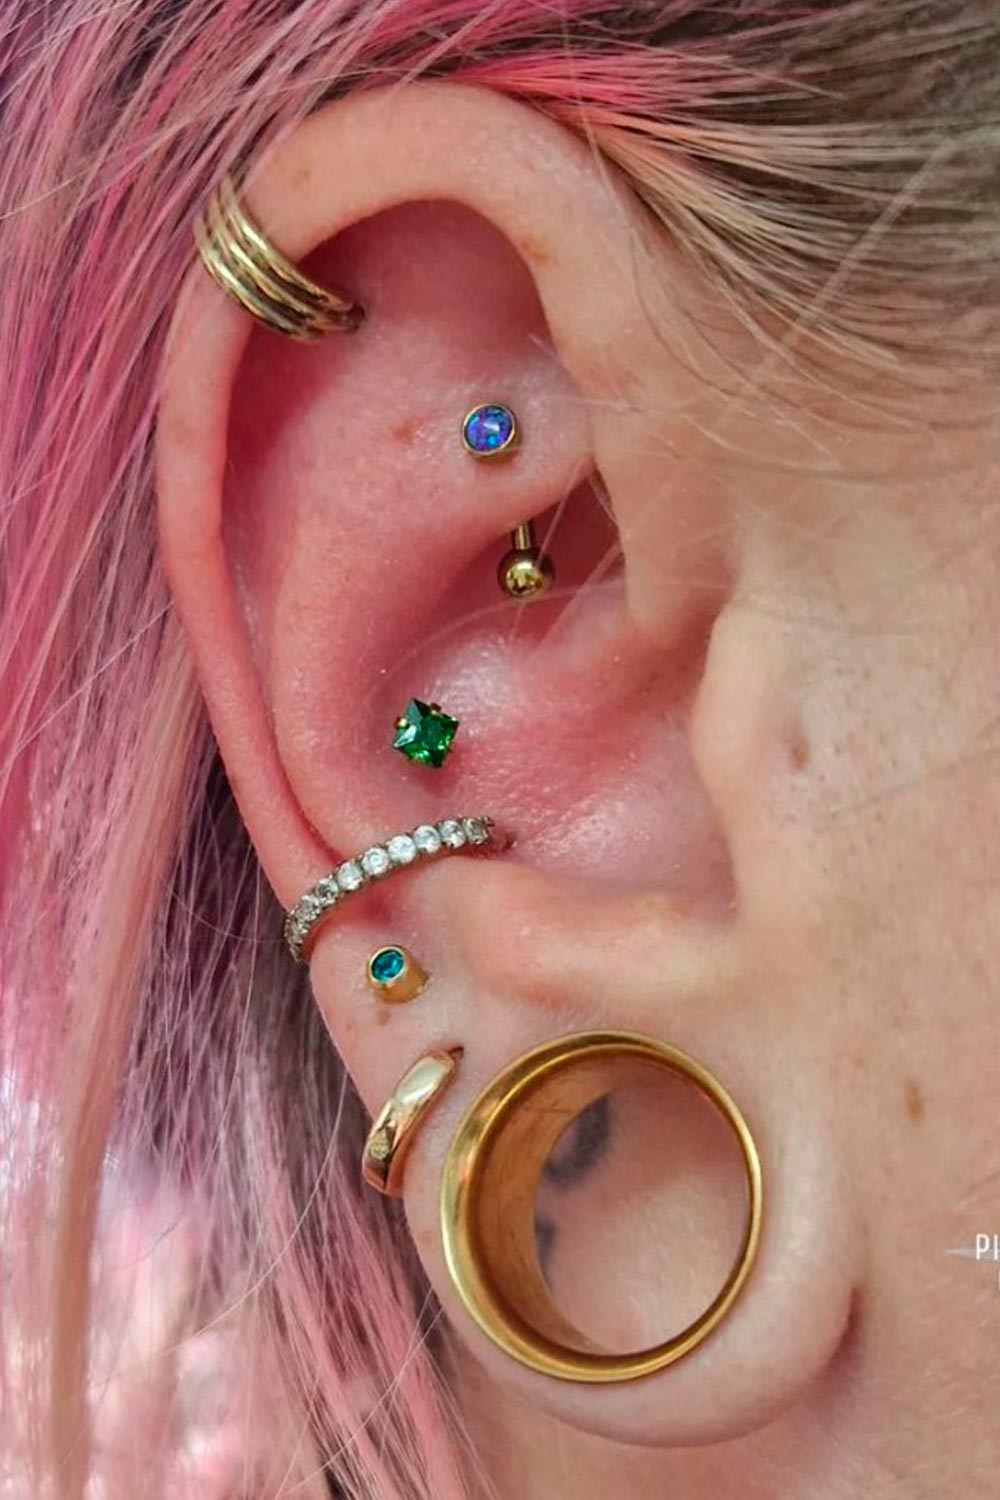 What’s The Average Price For Rook Piercing?